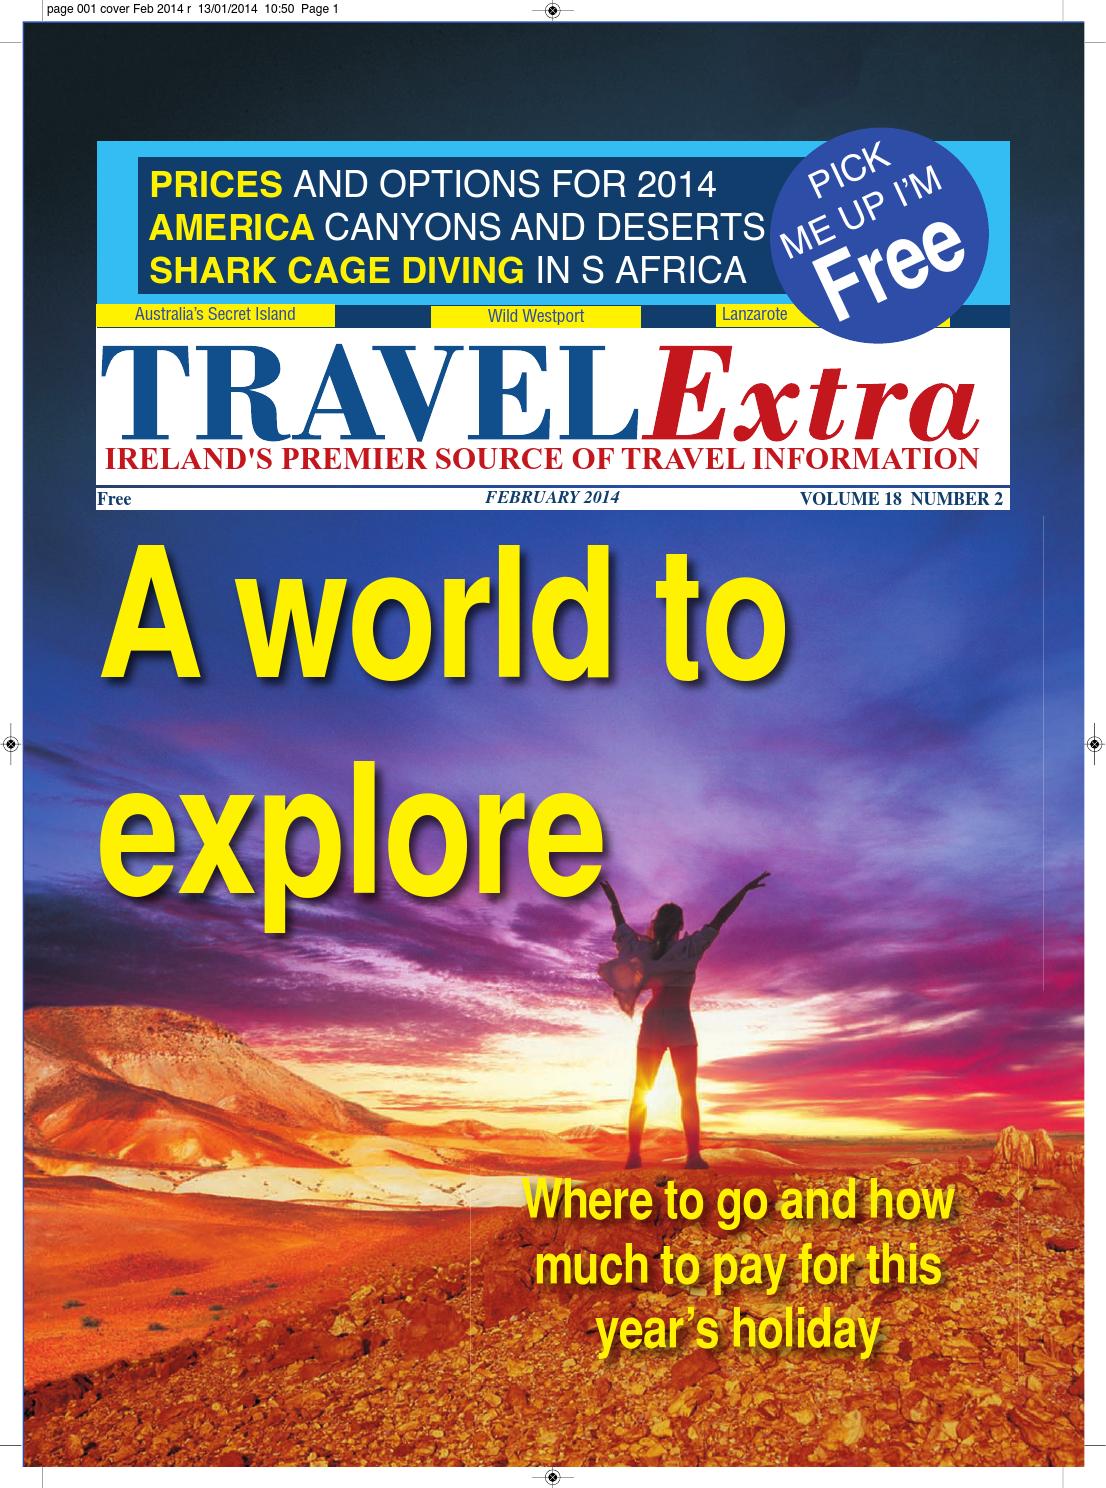 Magasin Canapé Brest Génial Travel Extra February 2014 Holiday World Edition by Travel